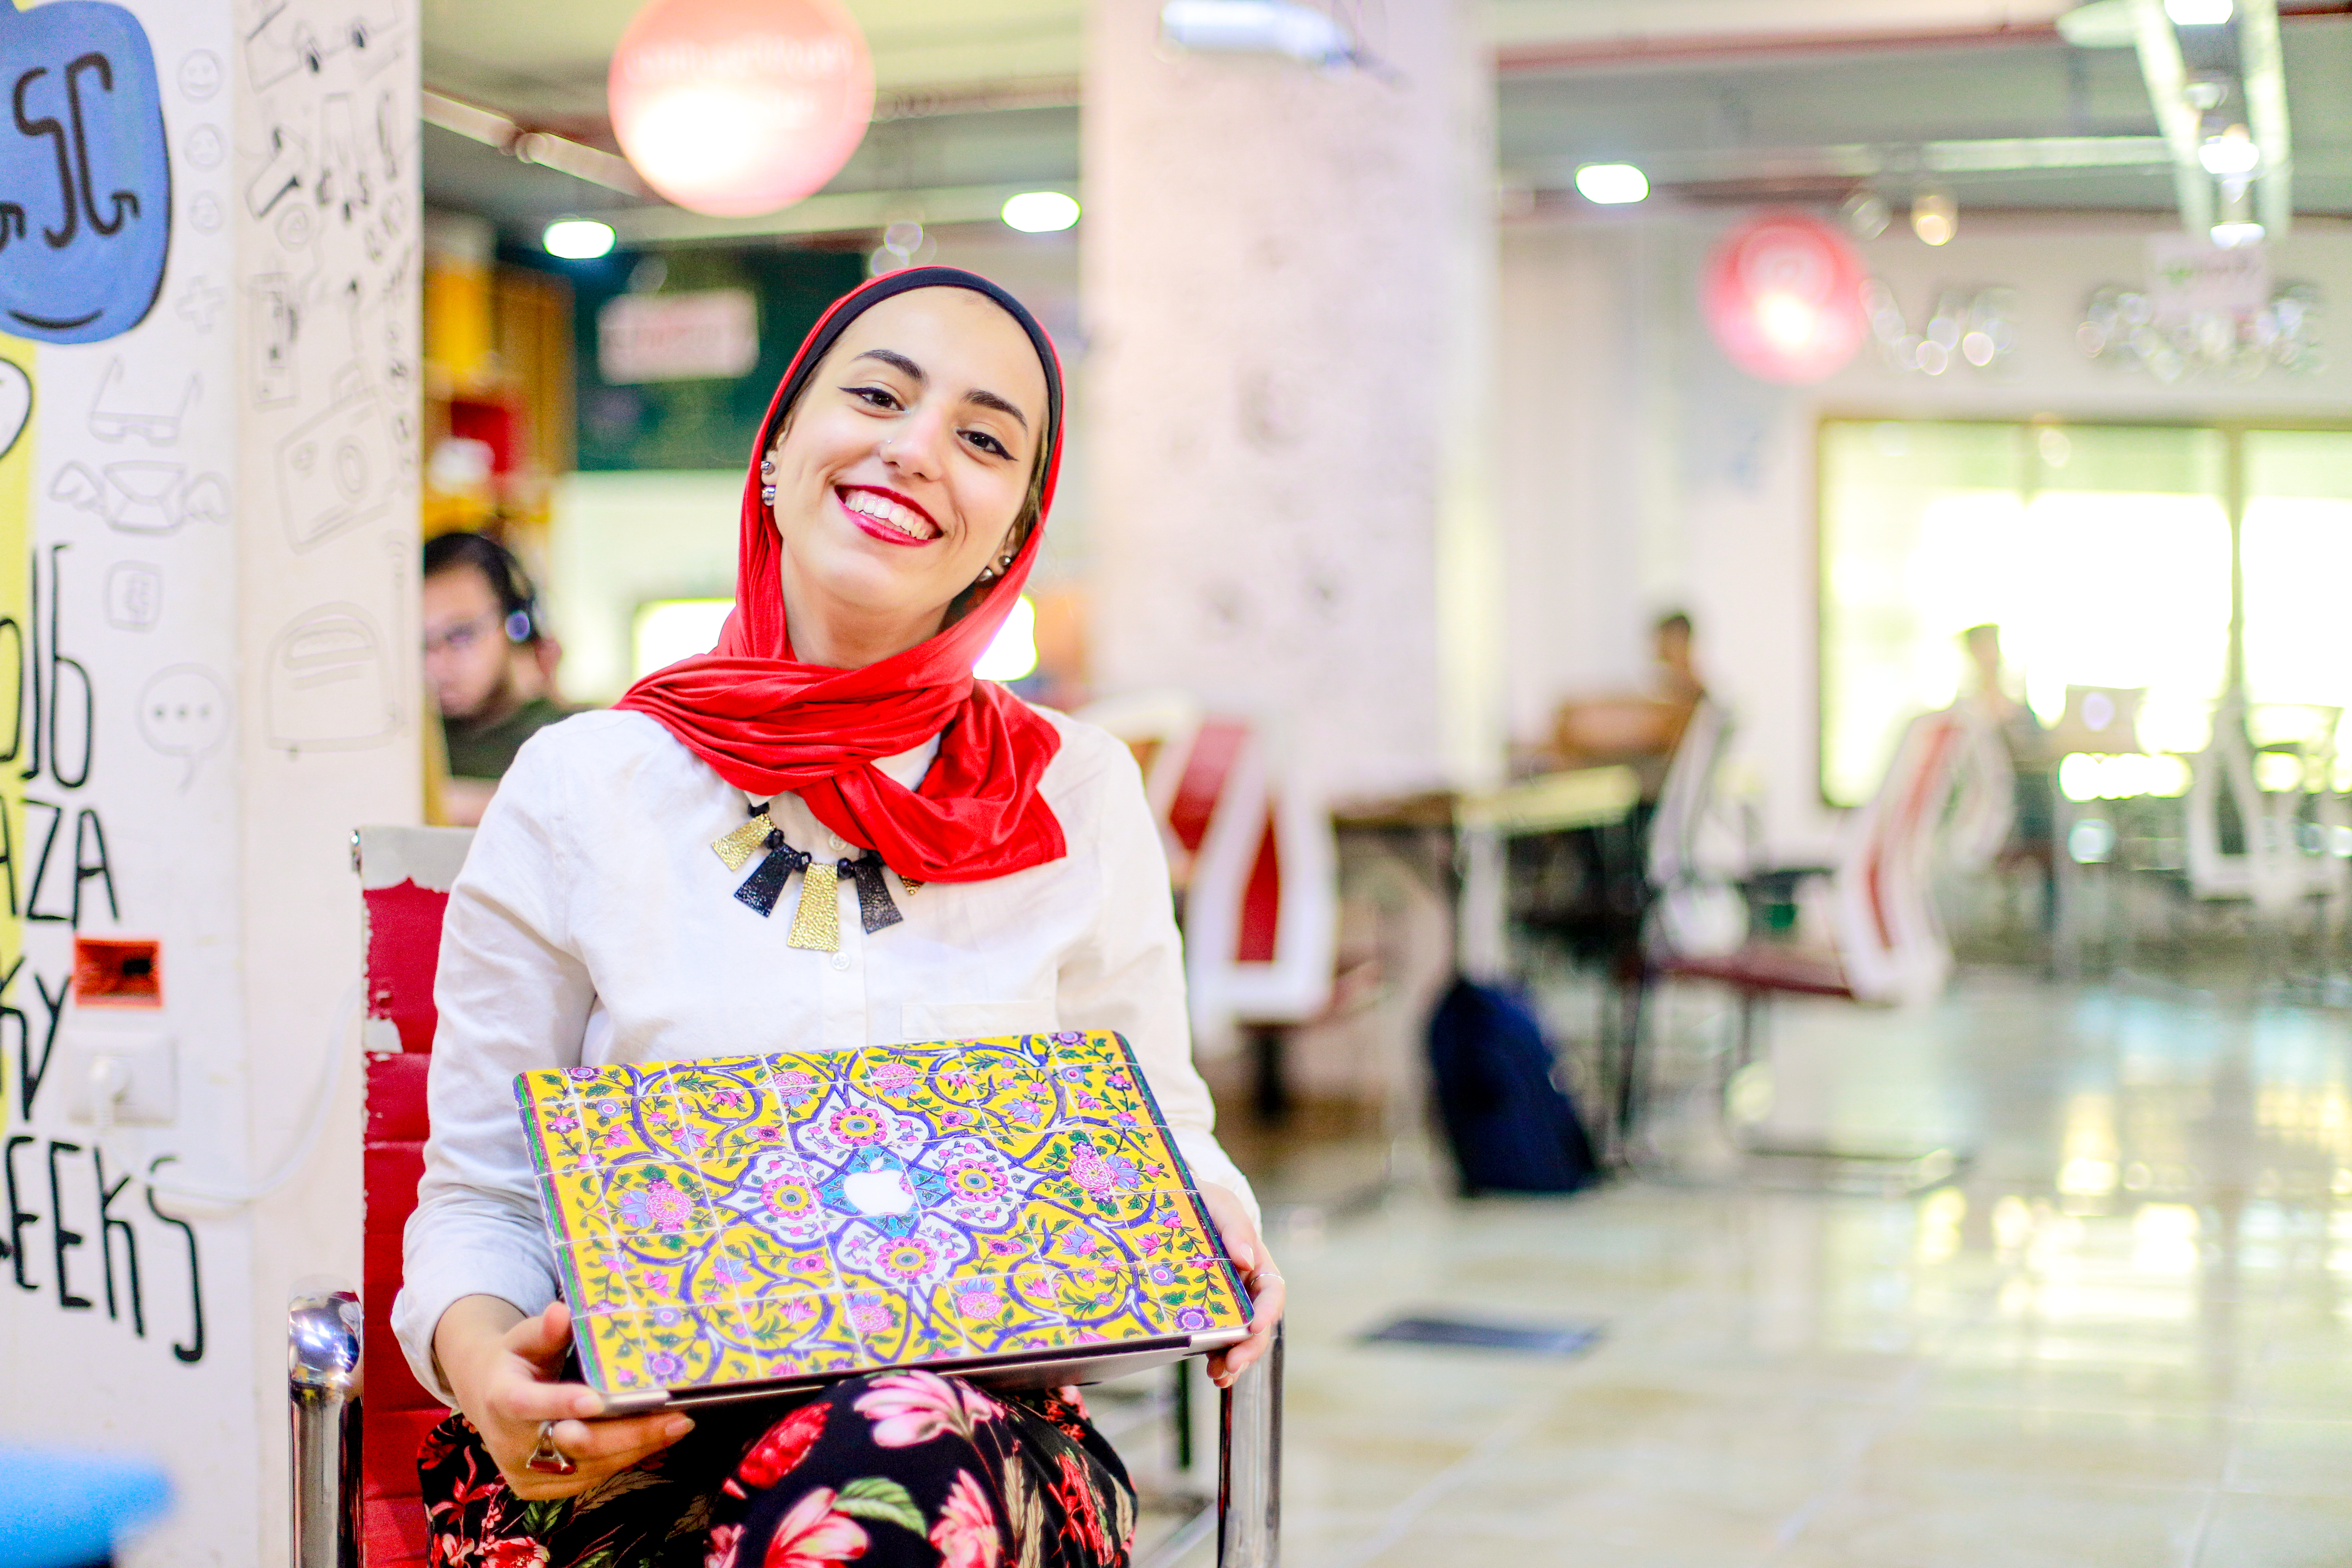 Eman, a freelance medical translator and graduate of mercy corps' gaza sky geeks freelance training, with her laptop